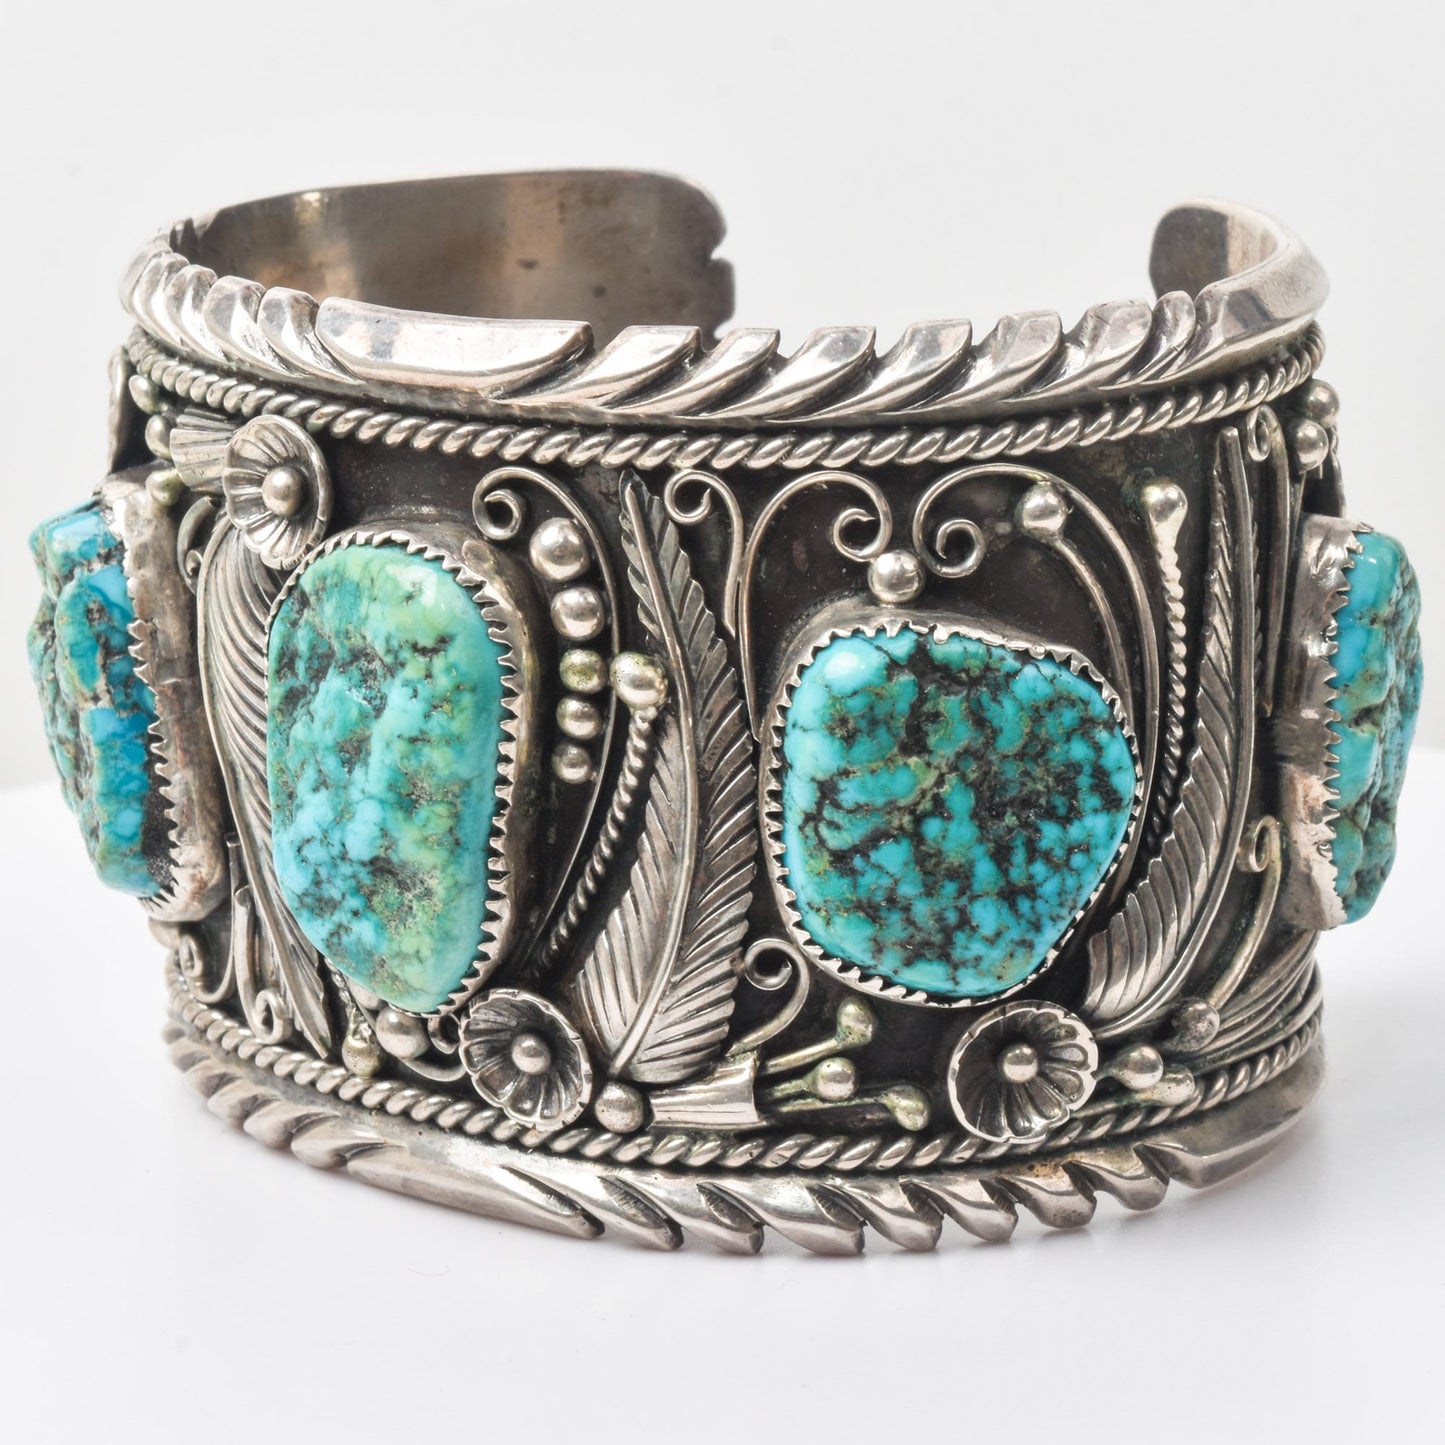 Signed Native American Turquoise Cuff Bracelet In Sterling Silver, Wide Chunky Floral Motif Cuff, 6.25" L